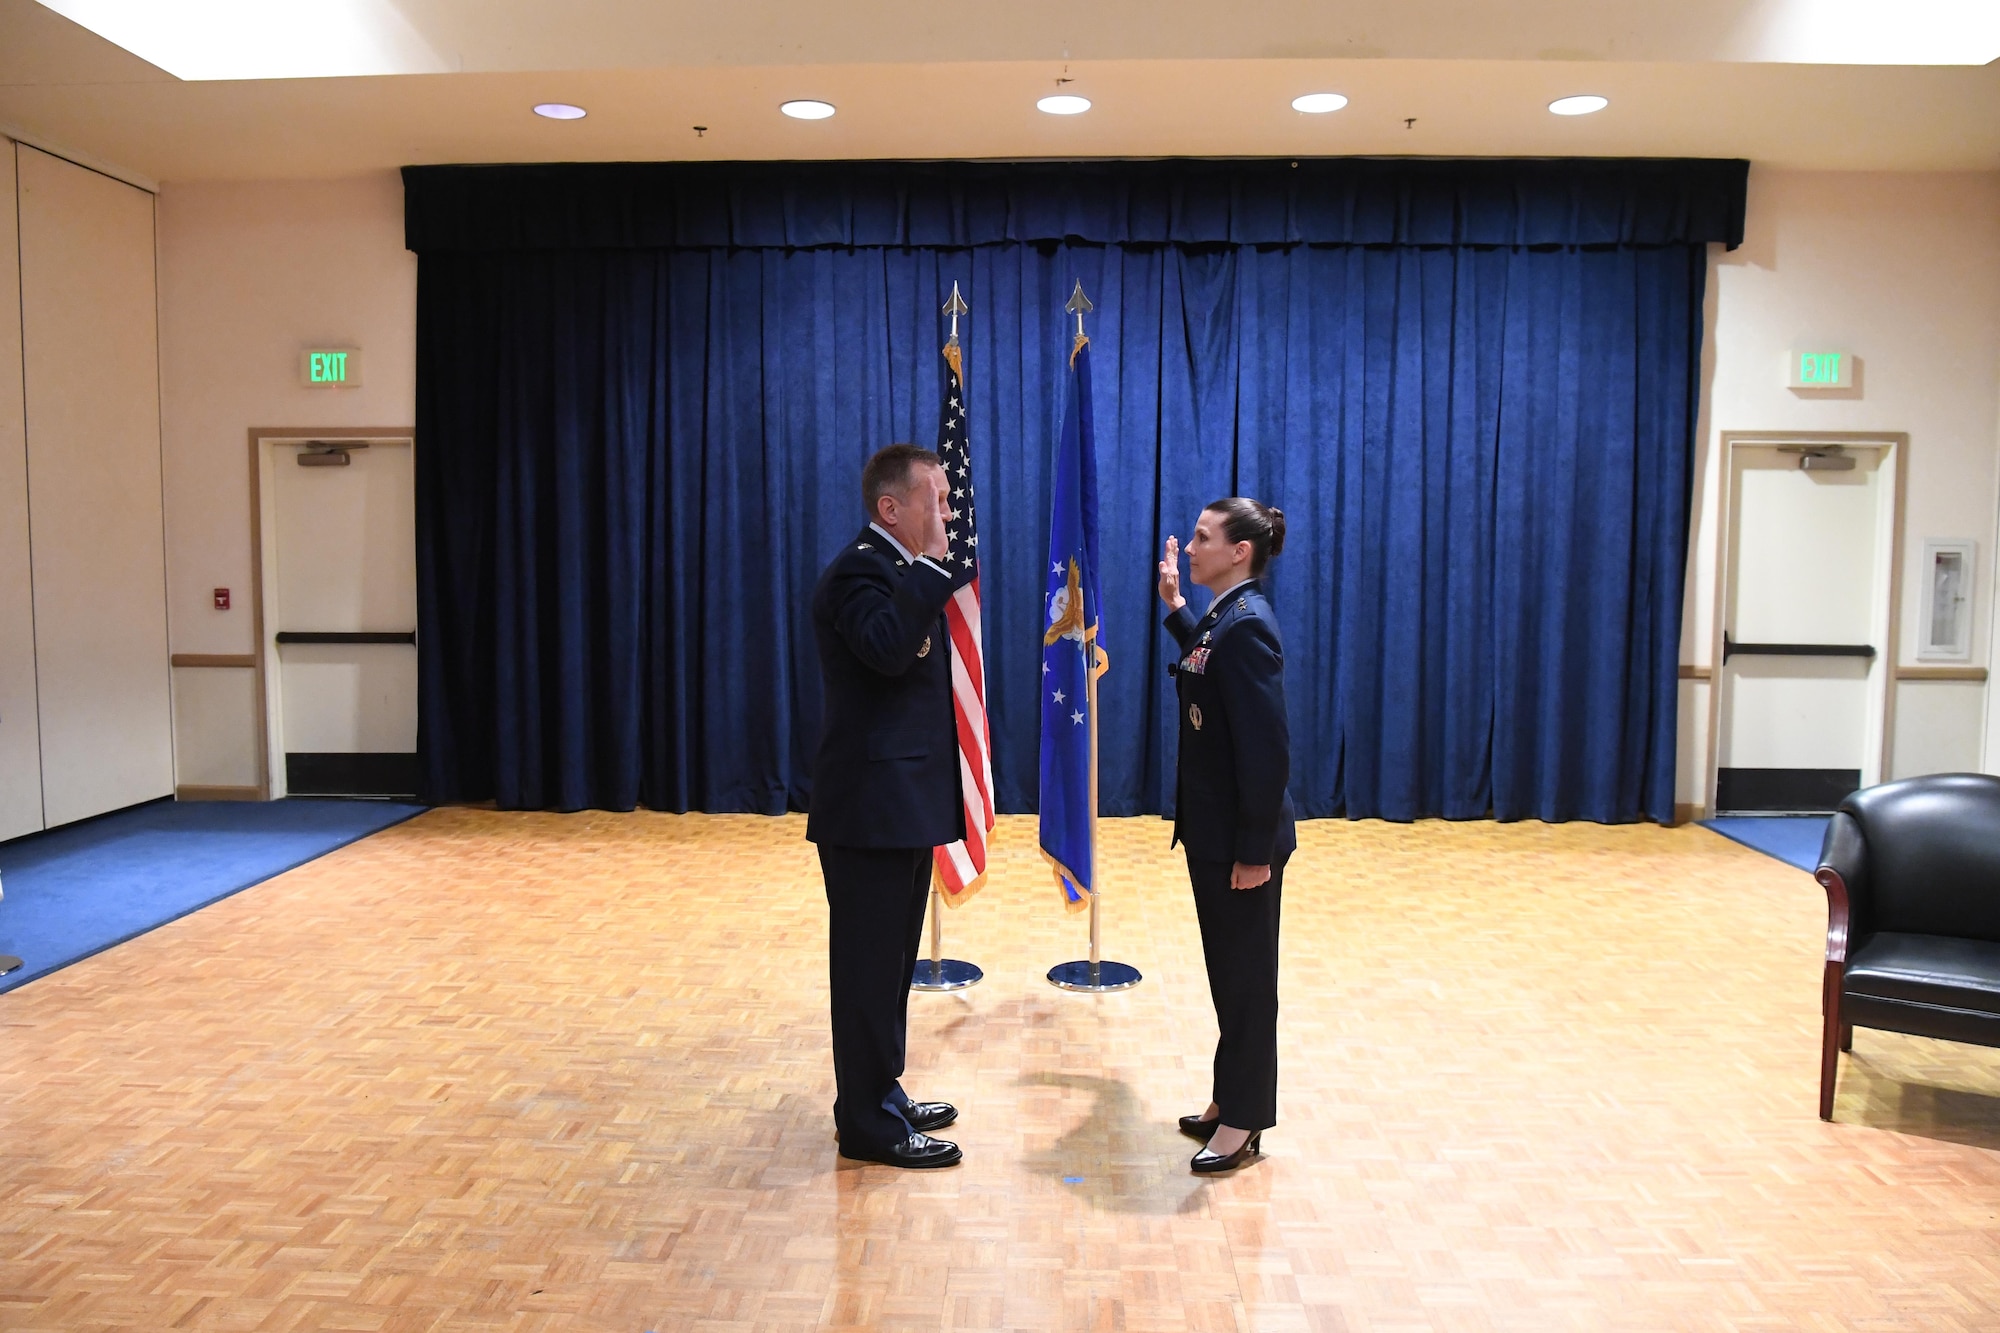 Maj. Gen. Pamela J. Lincoln, Mobilization Assistant to the Commander, 14th Air Force (Air Forces Strategic) and Joint Functional Component Command for Space, is administered the oath of office by Lt. Gen. David J. Buck, 14th AF (AFSTRAT) and JFCC SPACE Commander, during a ceremony marking her promotion to major general July 10, 2017 at Vandenberg Air Force Base, California. (U.S. Air Force photo by Capt. Nicholas Mercurio/Released)